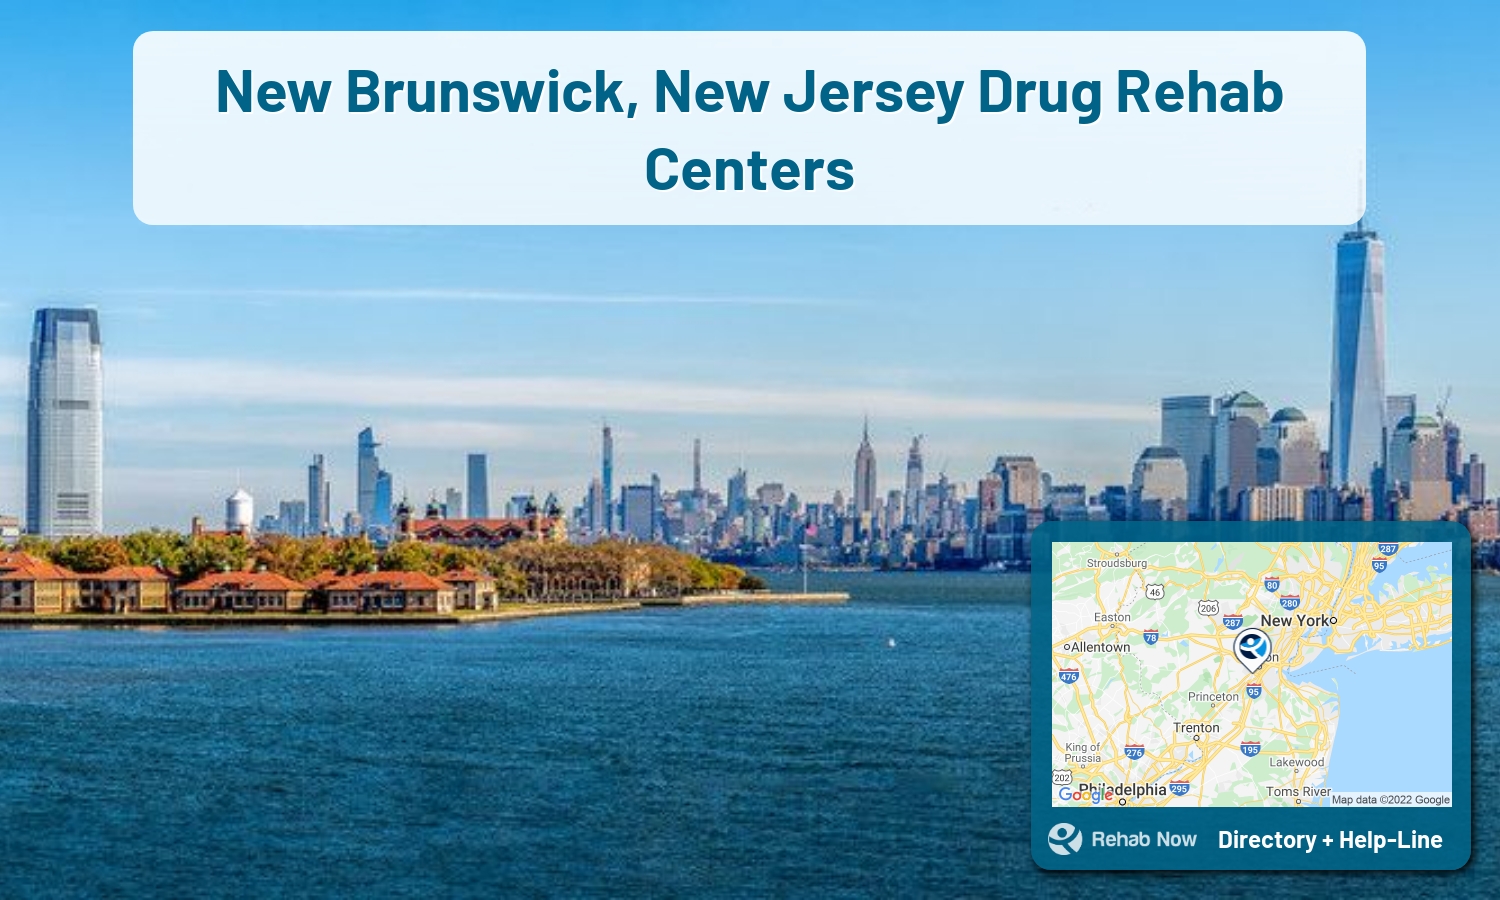 Struggling with addiction in New Brunswick, New Jersey? RehabNow helps you find the best treatment center or rehab available.